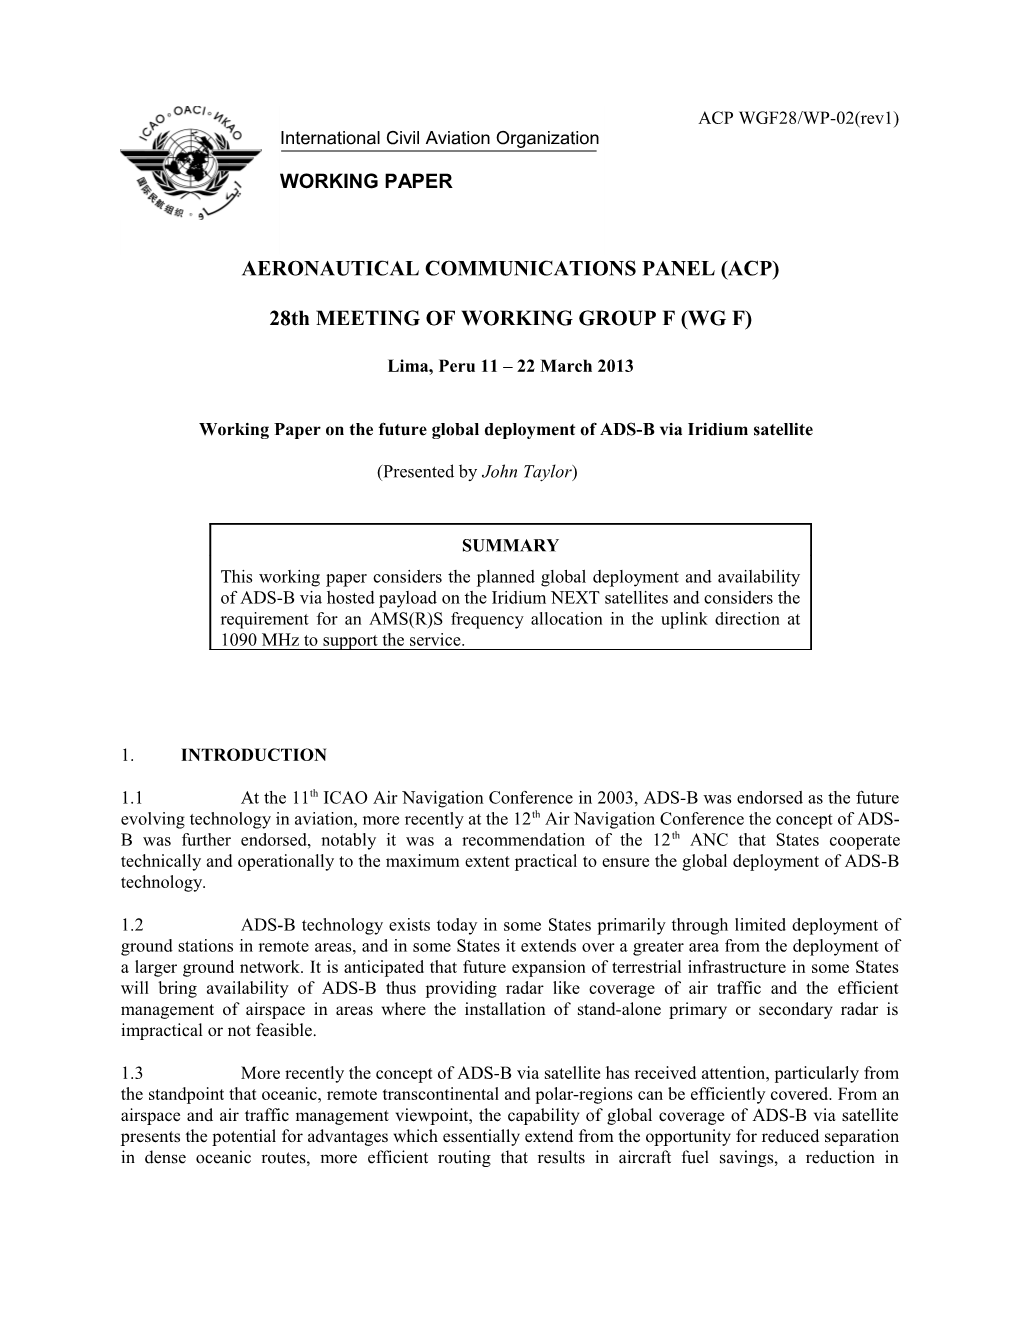 Proposed Updates to the Working Document Towards a Preliminary Draft New Report ITU-R M